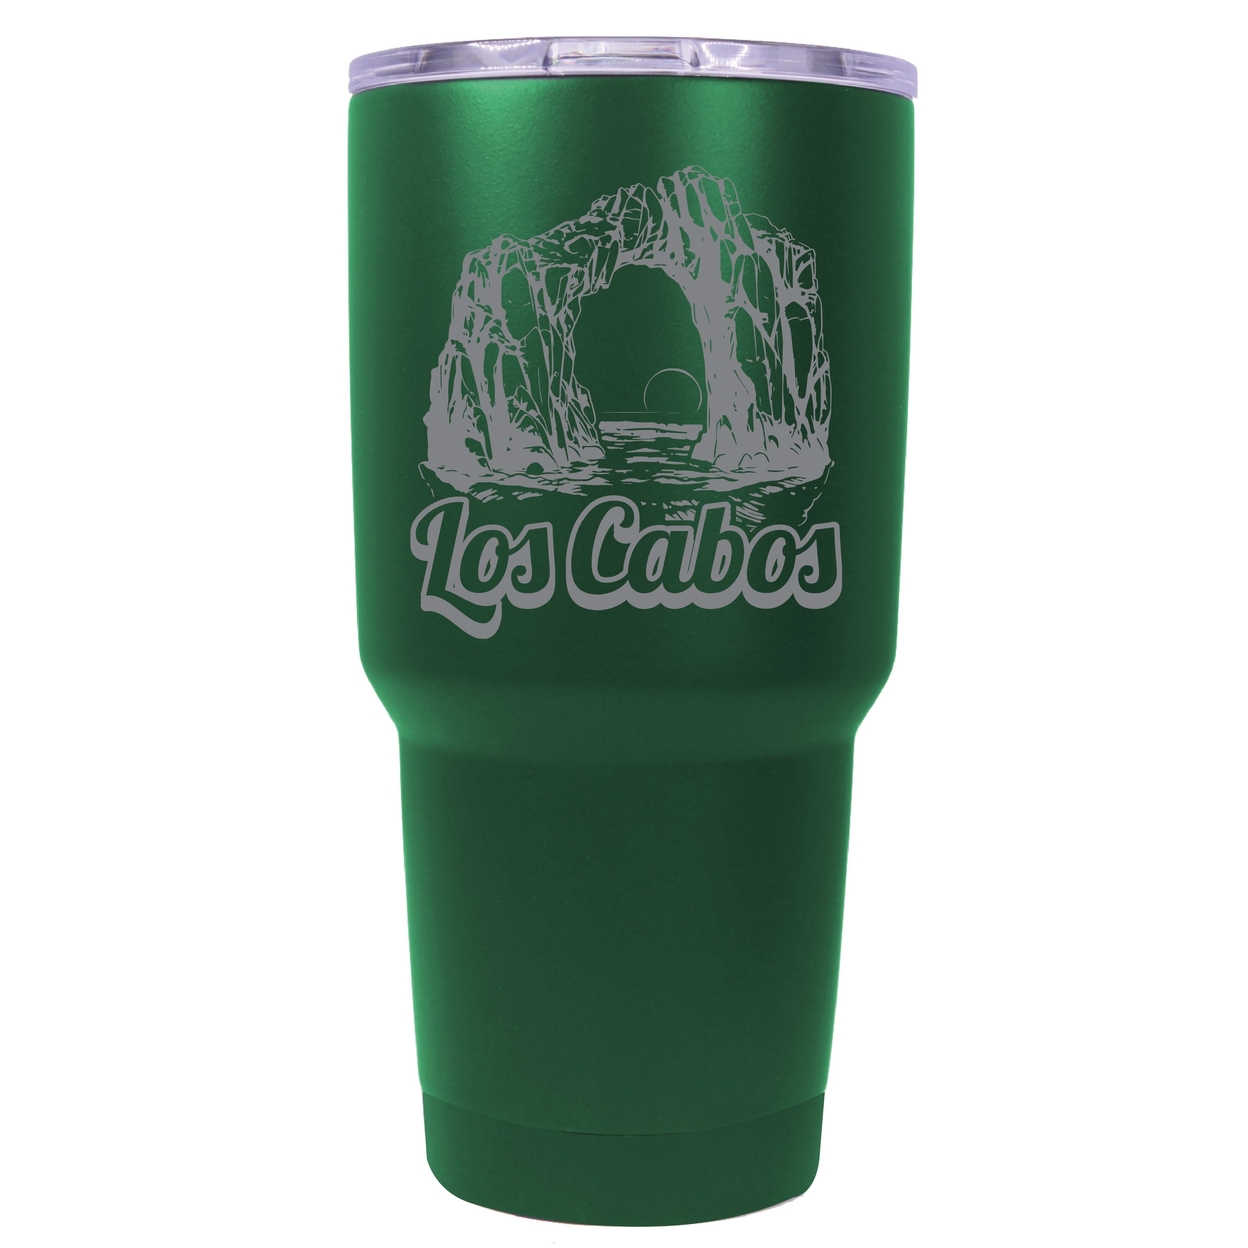 Los Cabos Mexico Souvenir 24 Oz Engraved Insulated Stainless Steel Tumbler - Green,,Single Unit